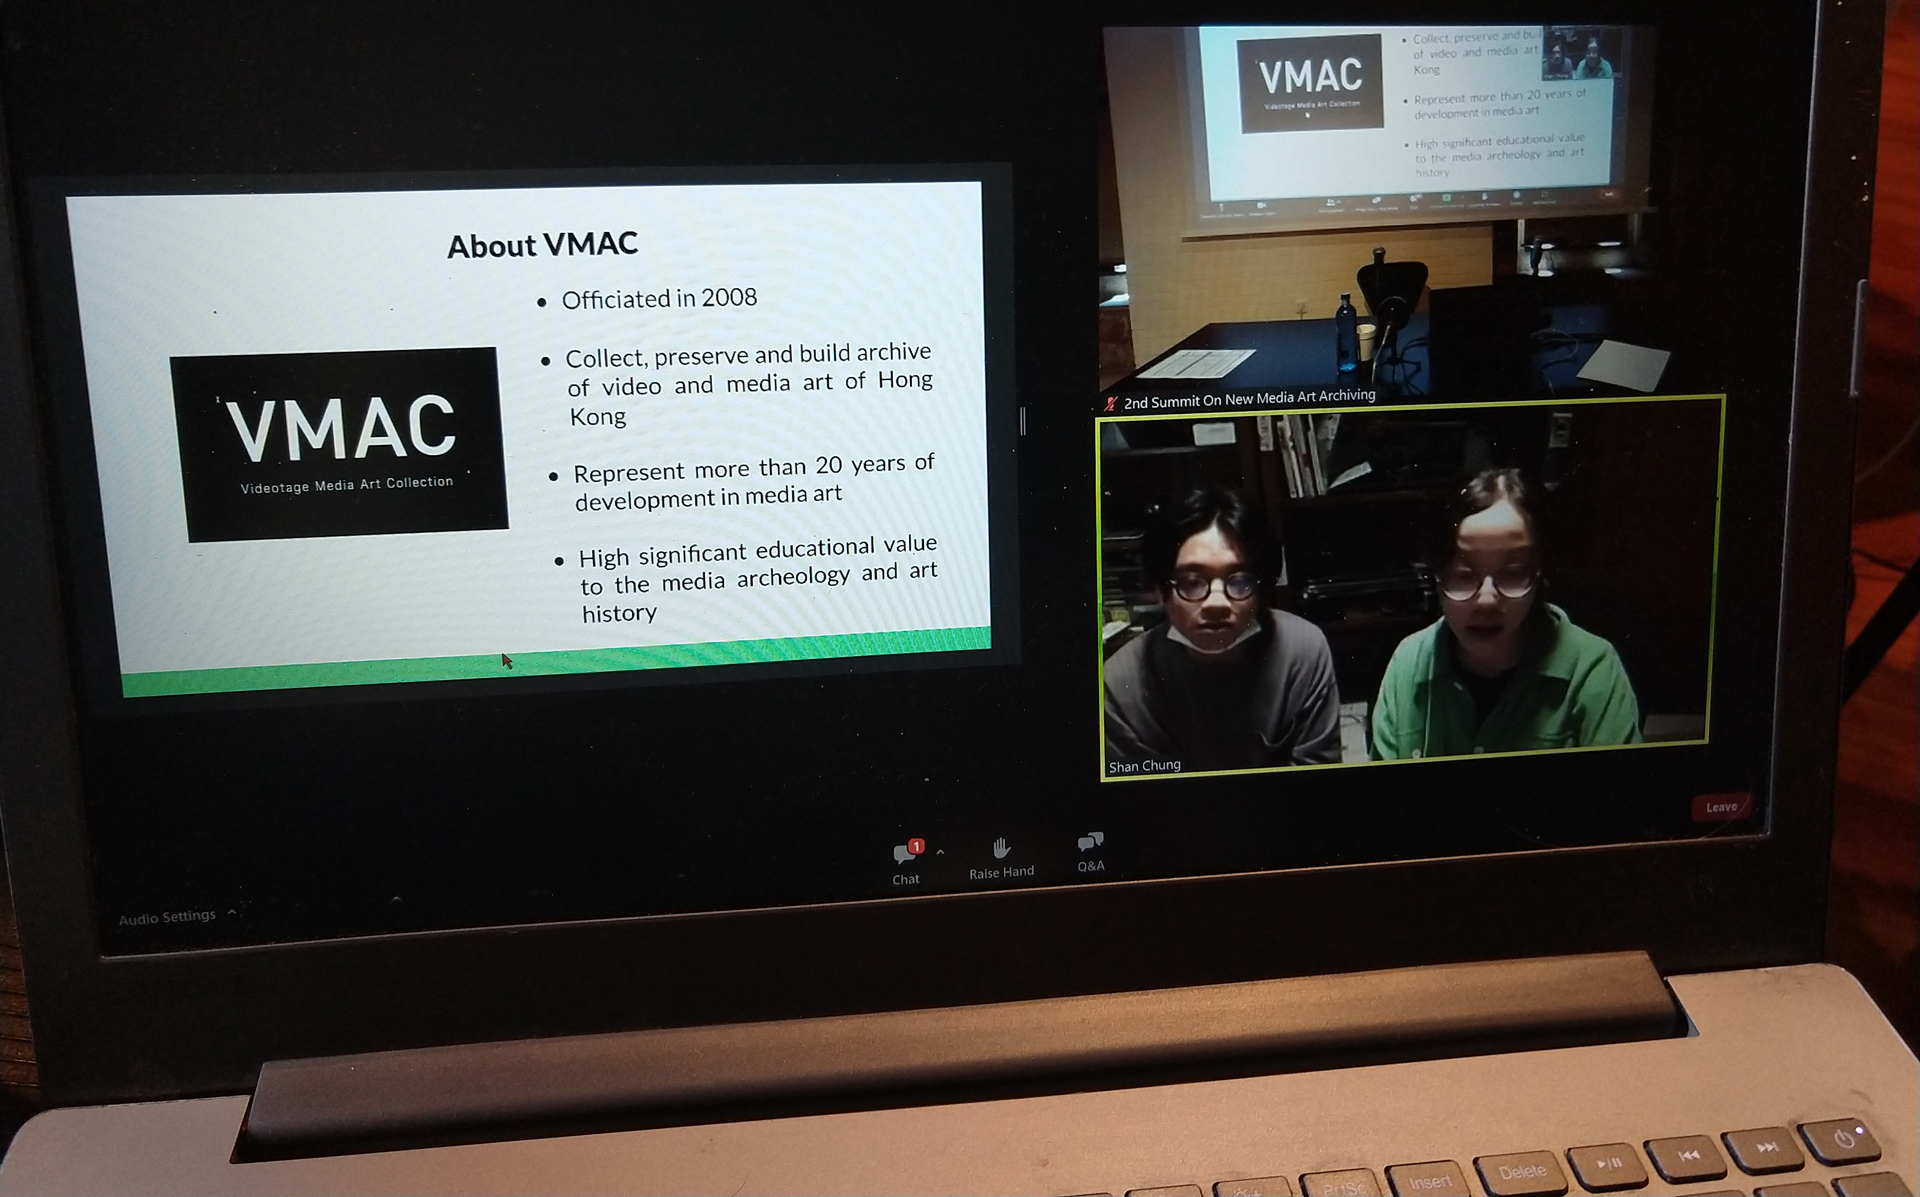 ©ISEA2022: 27th International Symposium on Electronic Art, Wing Shan Chung and John Ho Fung Chow, Introducing Videotage Media Art Collection (VMAC)